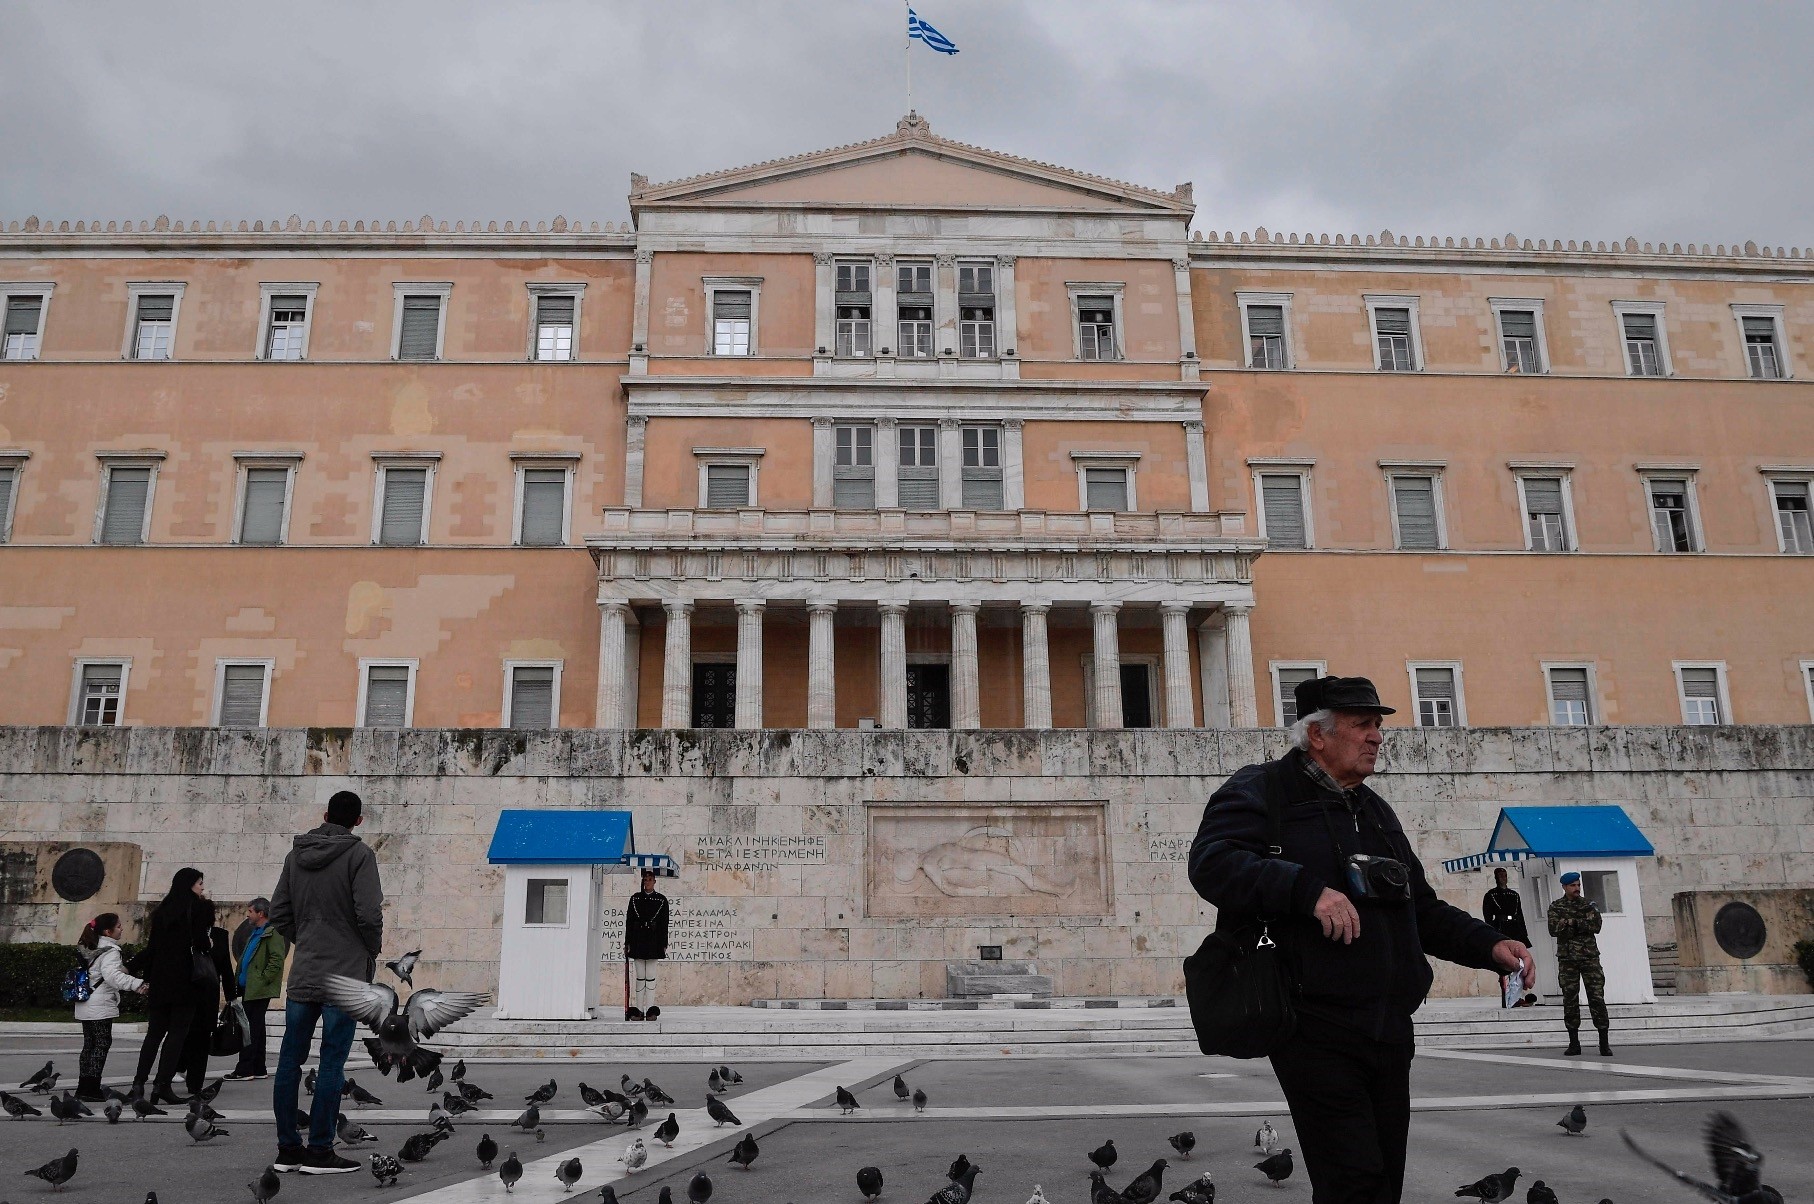 People walk in front of the Greek Parliament, central Athens, Feb. 8, 2019.